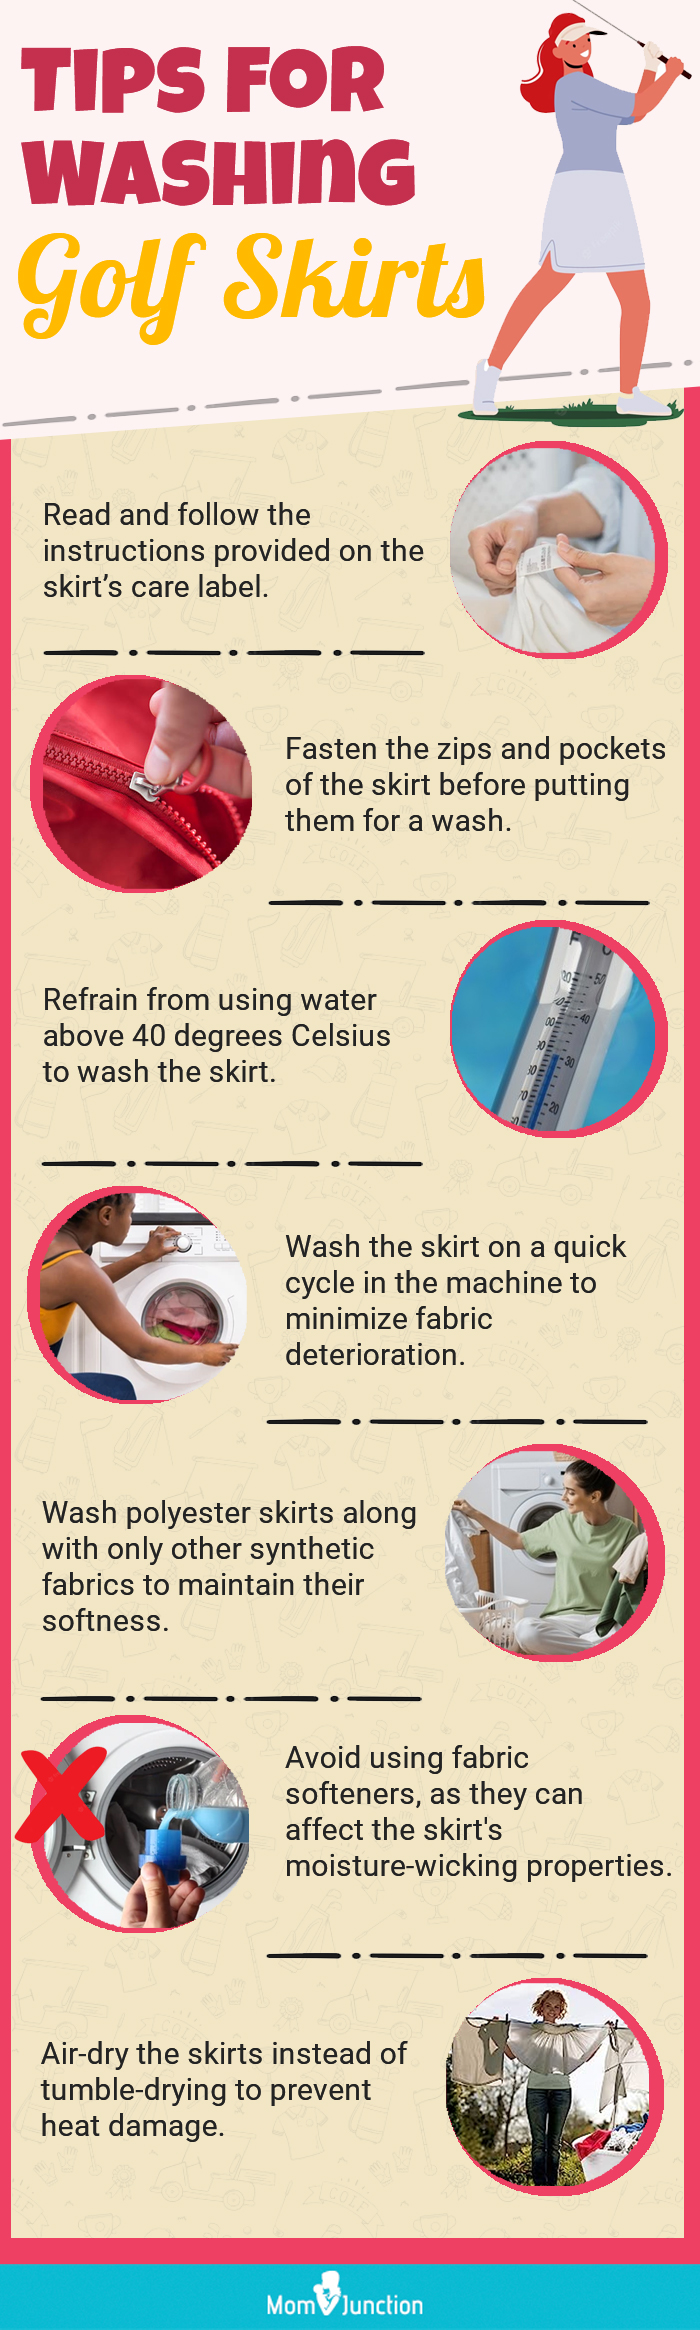 Tips For Washing Golf Skirts(infographic)